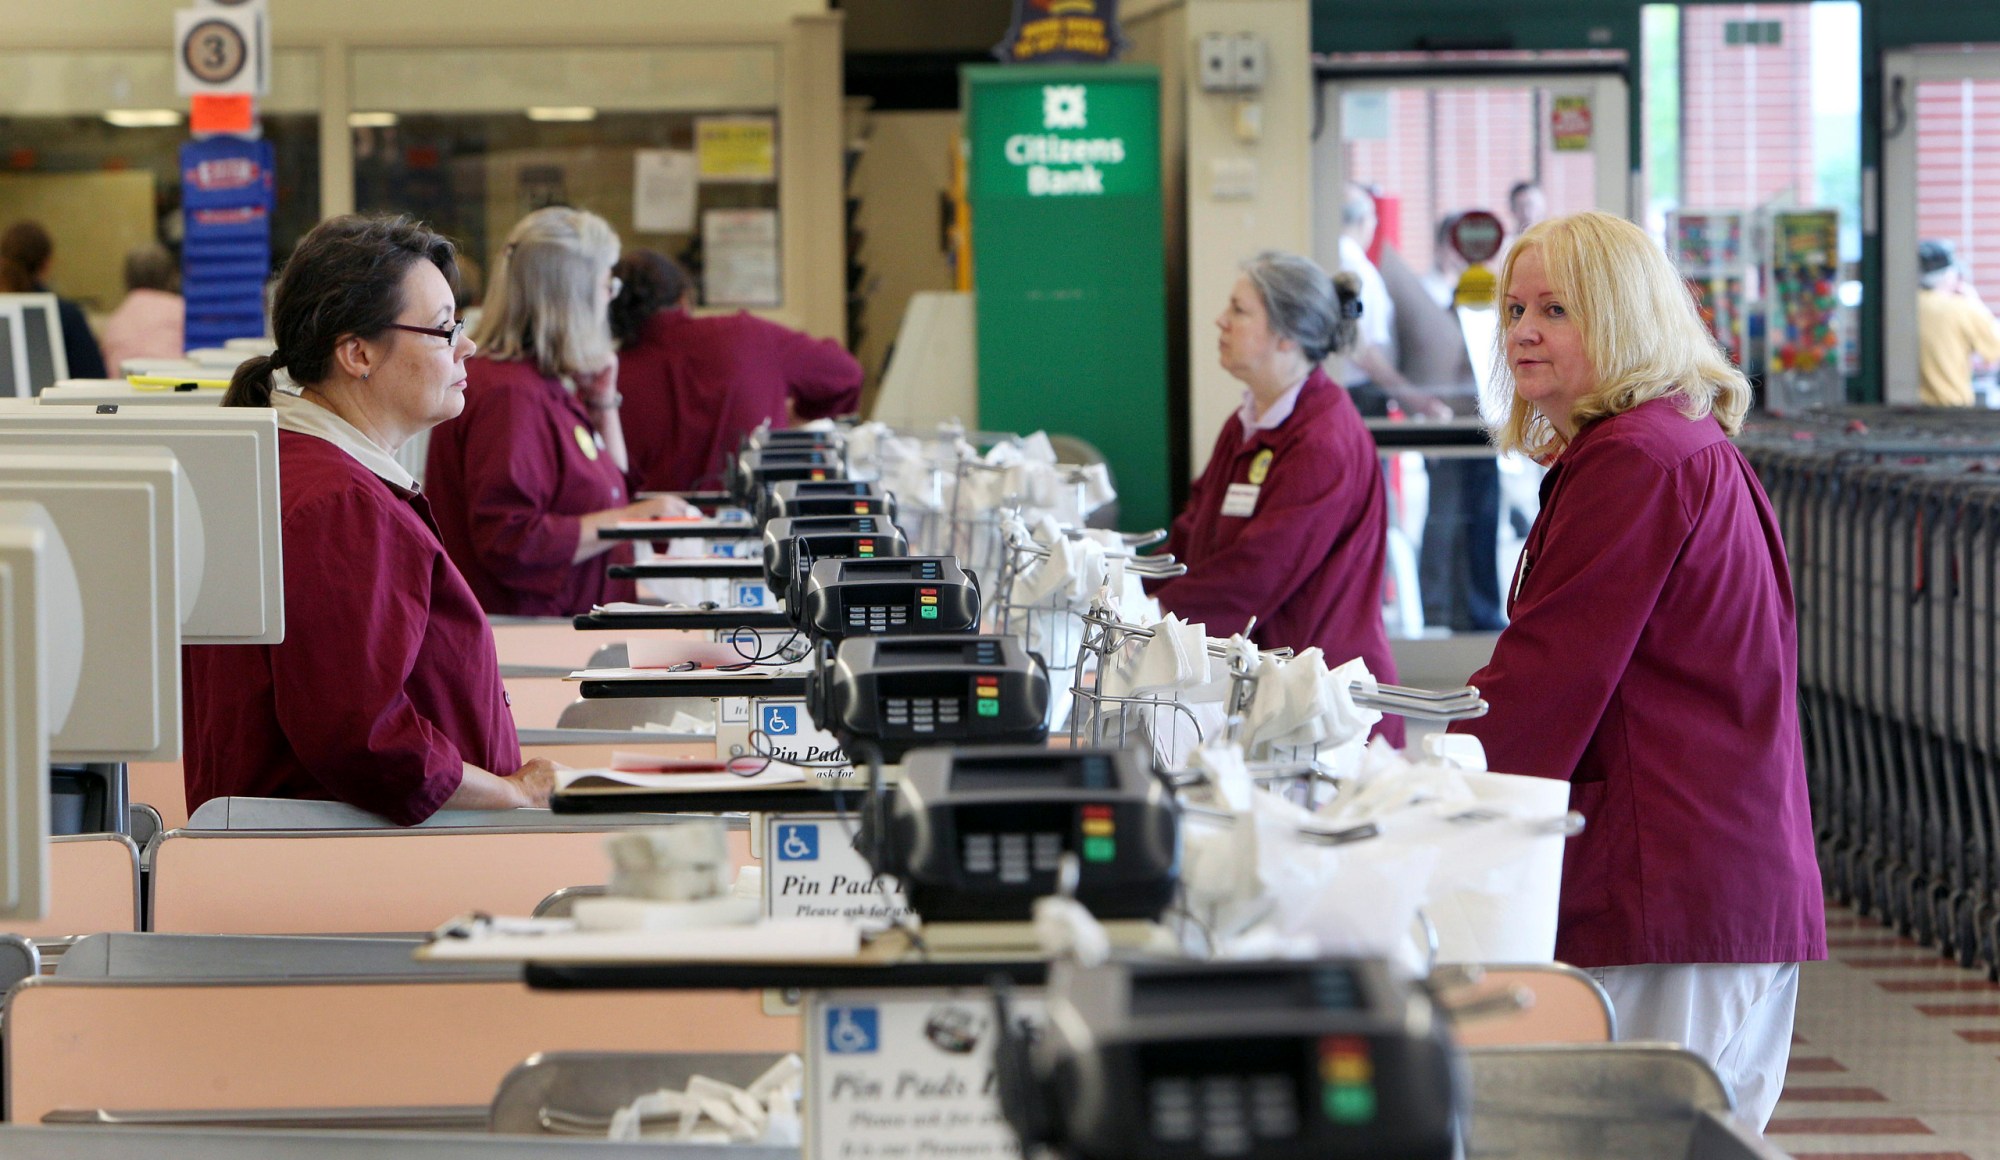 Cashiers and baggers stand idle Thursday, July 24, 2014 at a Market Basket supermarket in Concord, New Hampshire. (AP Photo)